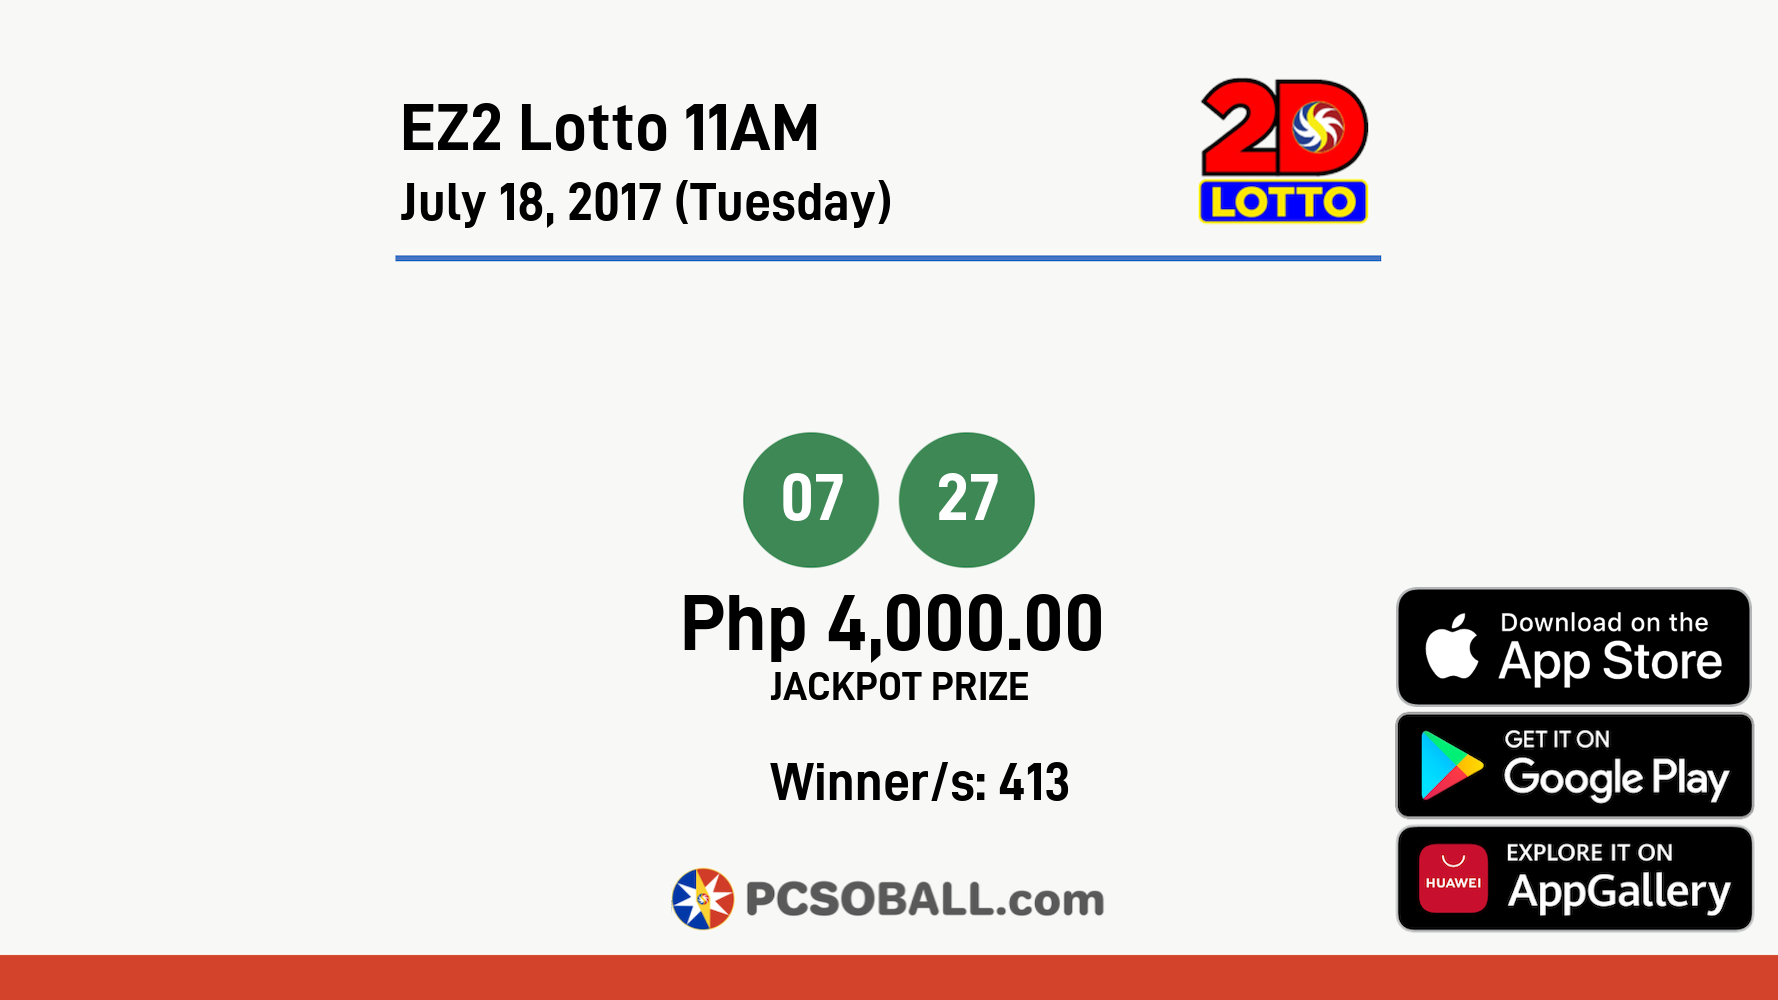 EZ2 Lotto 11AM July 18, 2017 (Tuesday) Result